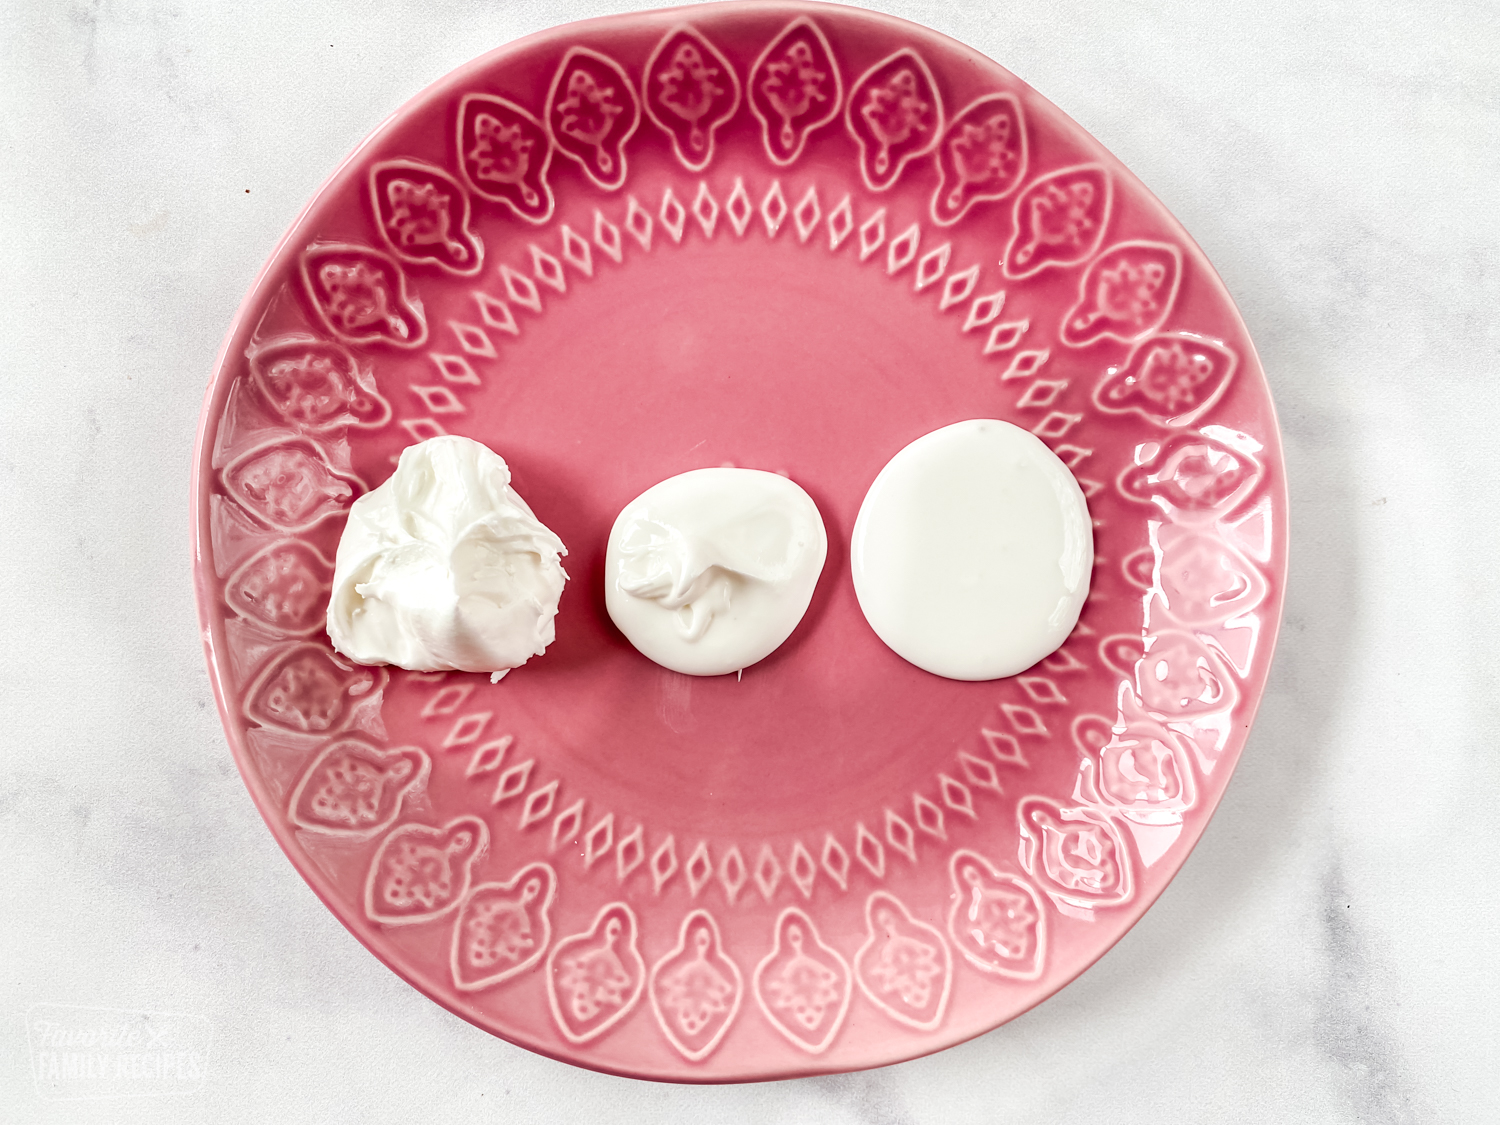 Three consistencies of royal icing on a plate